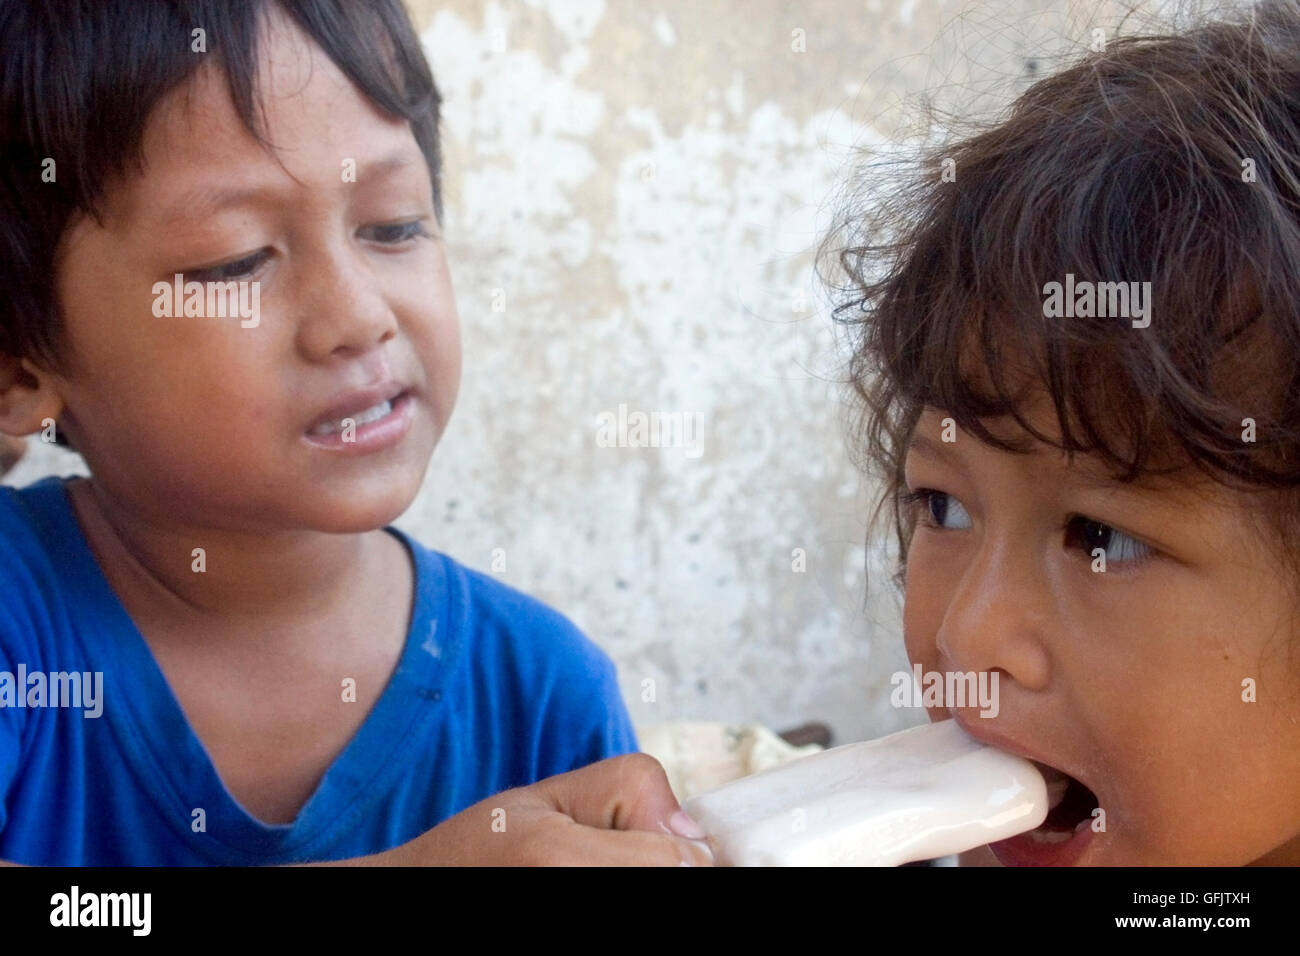 A boy is helping a young girl eat an ice cream bar in a slum in Kampong Cham, Cambodia. Stock Photo